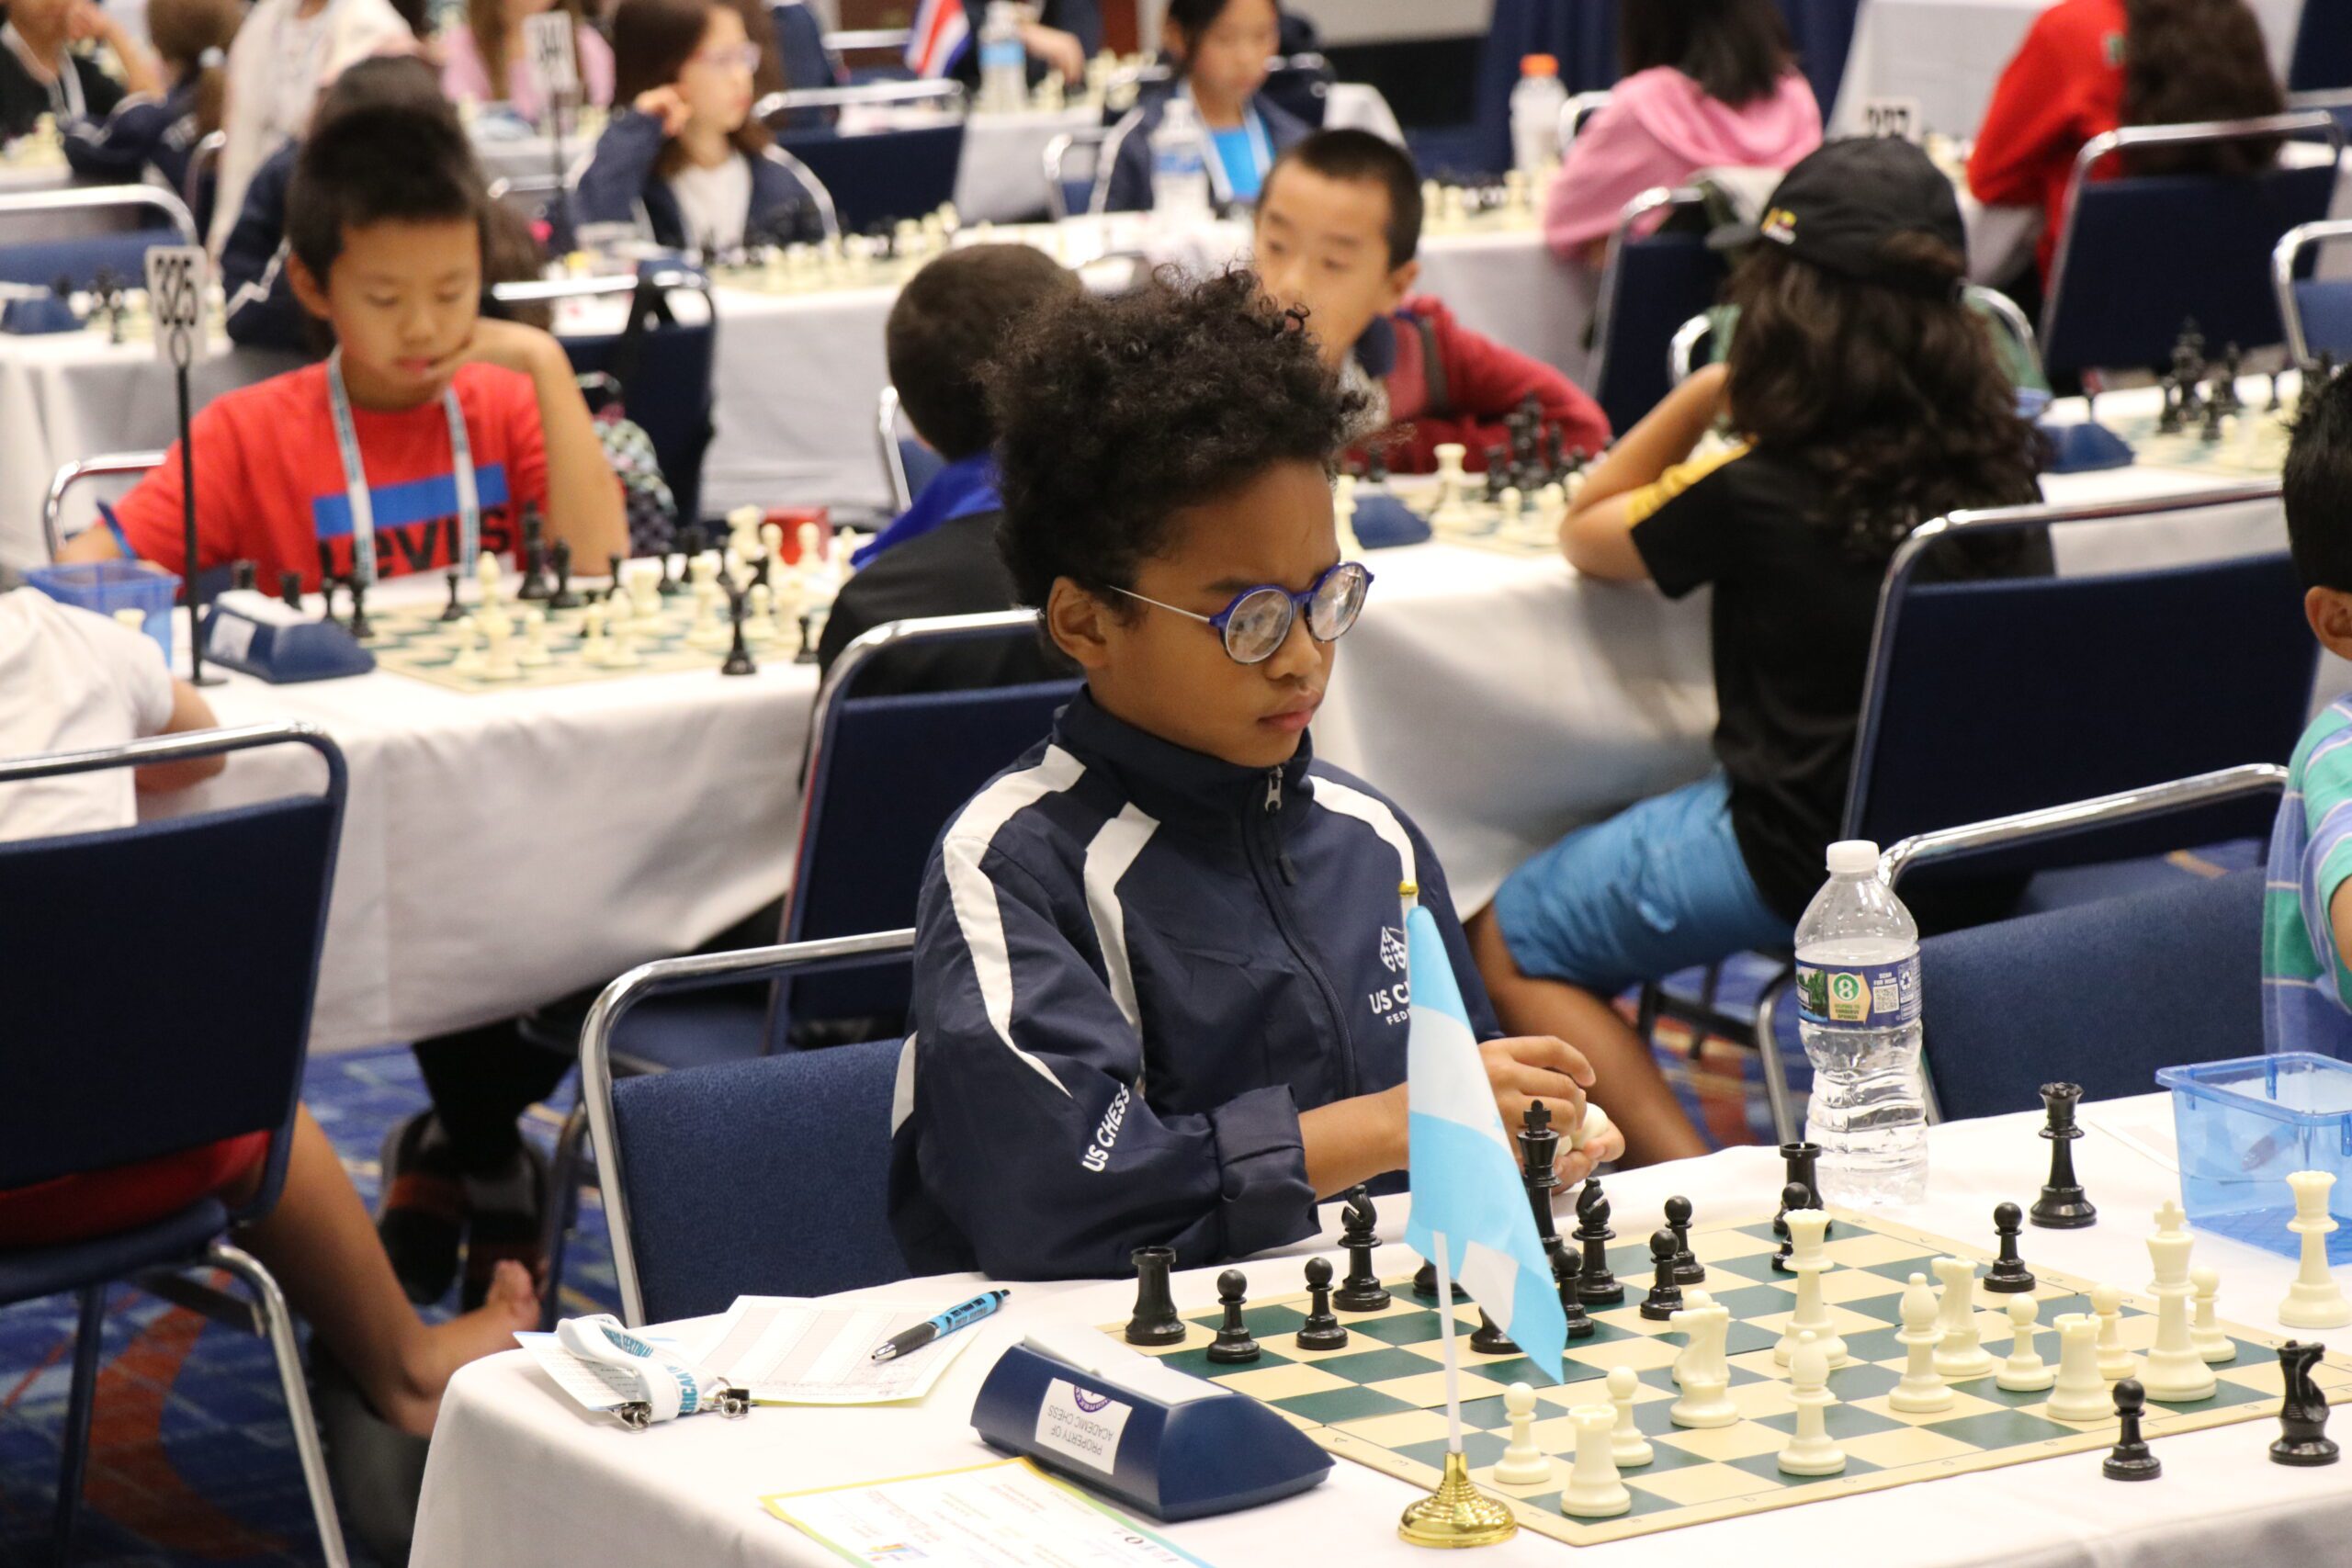 Colorful vibes at Pan-American Youth Chess Festival - The Chess Drum